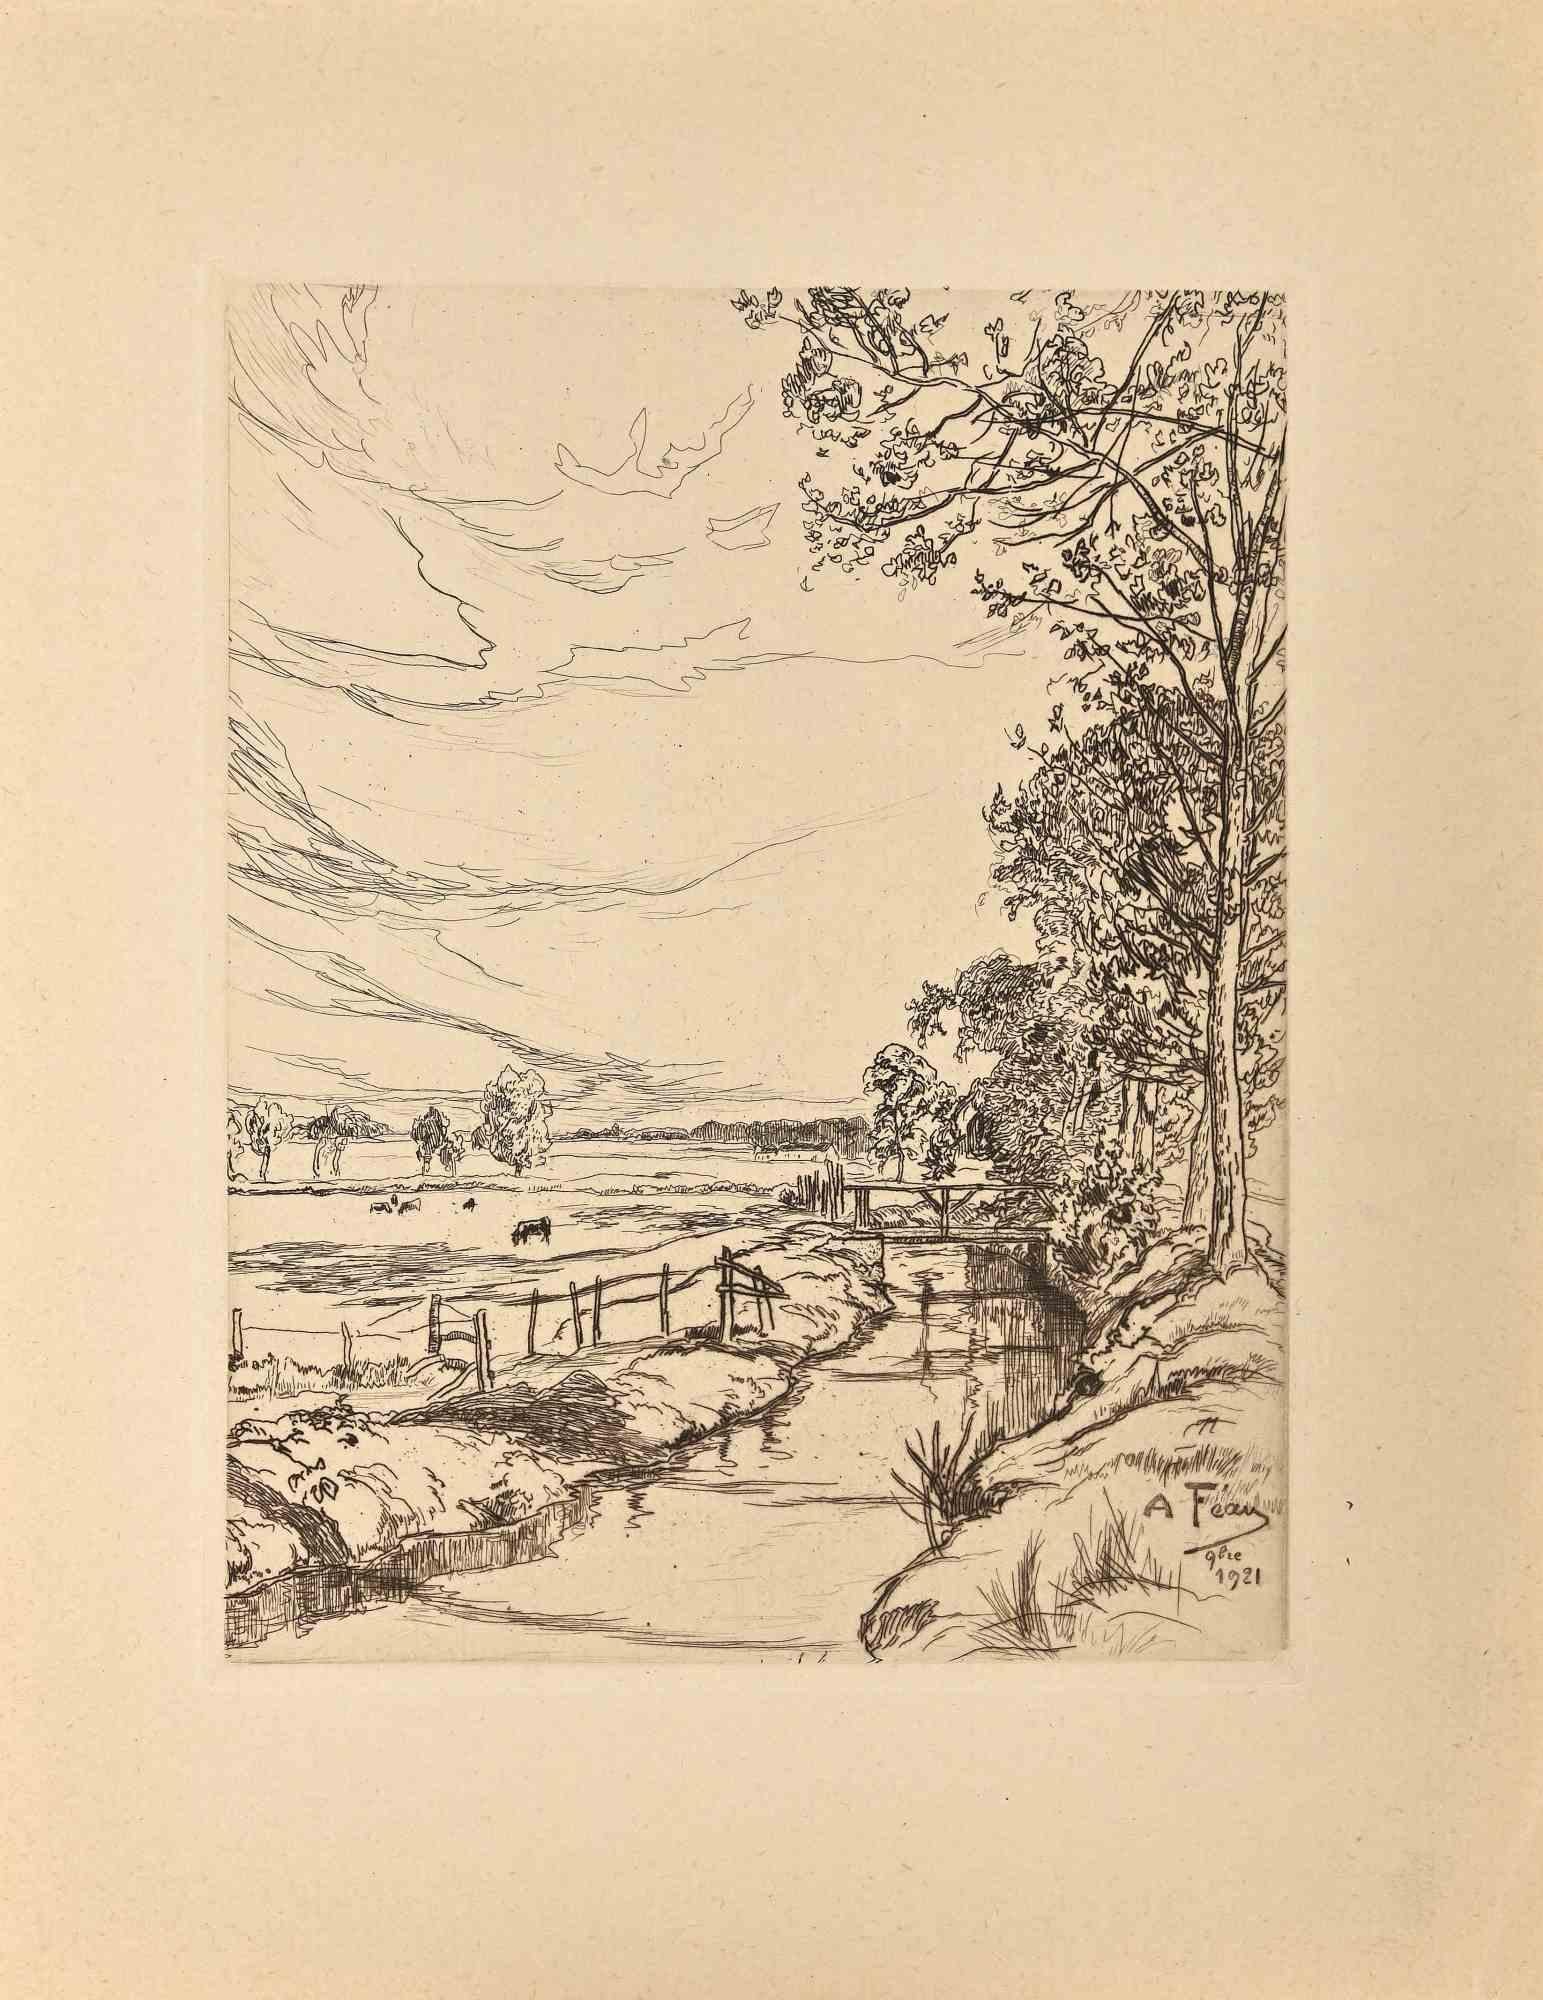 The River By Meadow - Original Etching by Amadée Feau - 1921